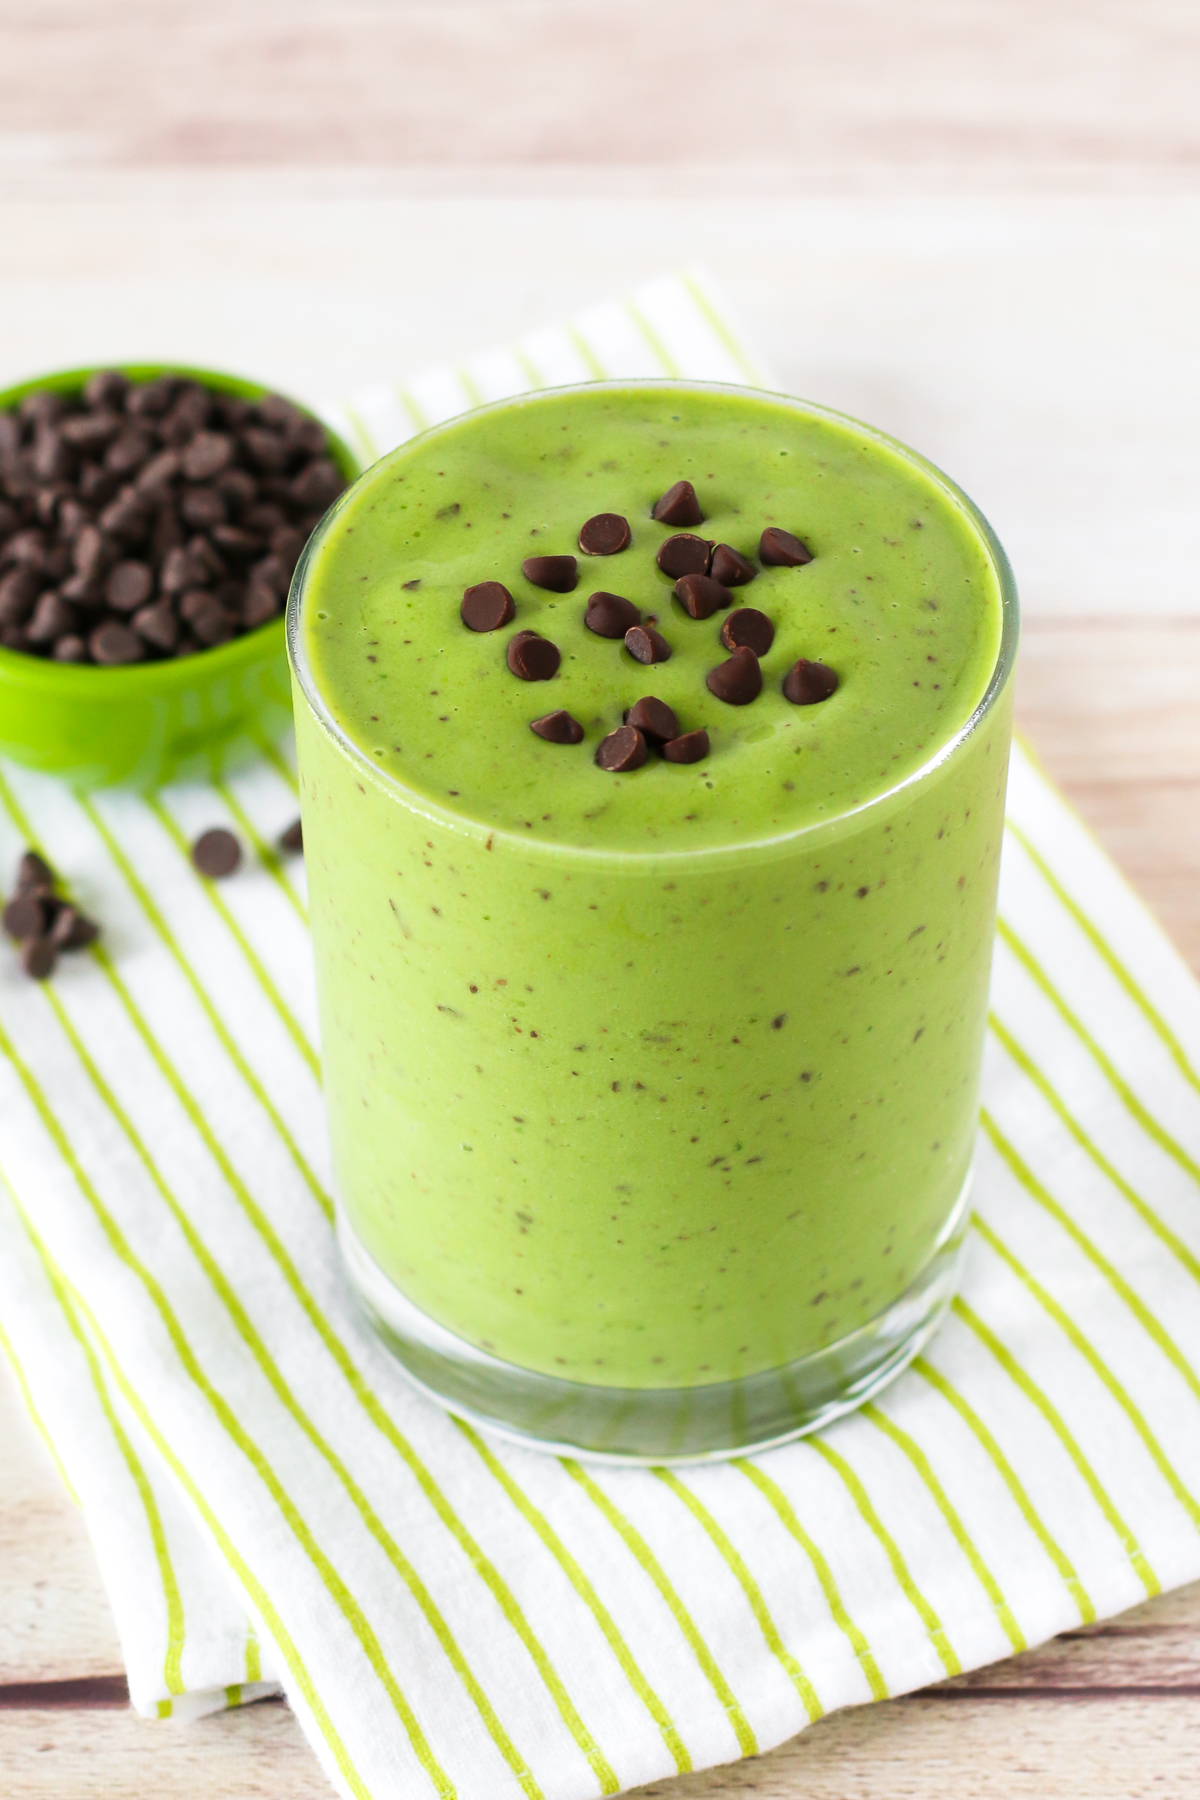 Dairy Free Mint Chocolate Chip Smoothie. Made with just a few simple ingredients, this mint chocolate chip smoothie tastes too good to be healthy!